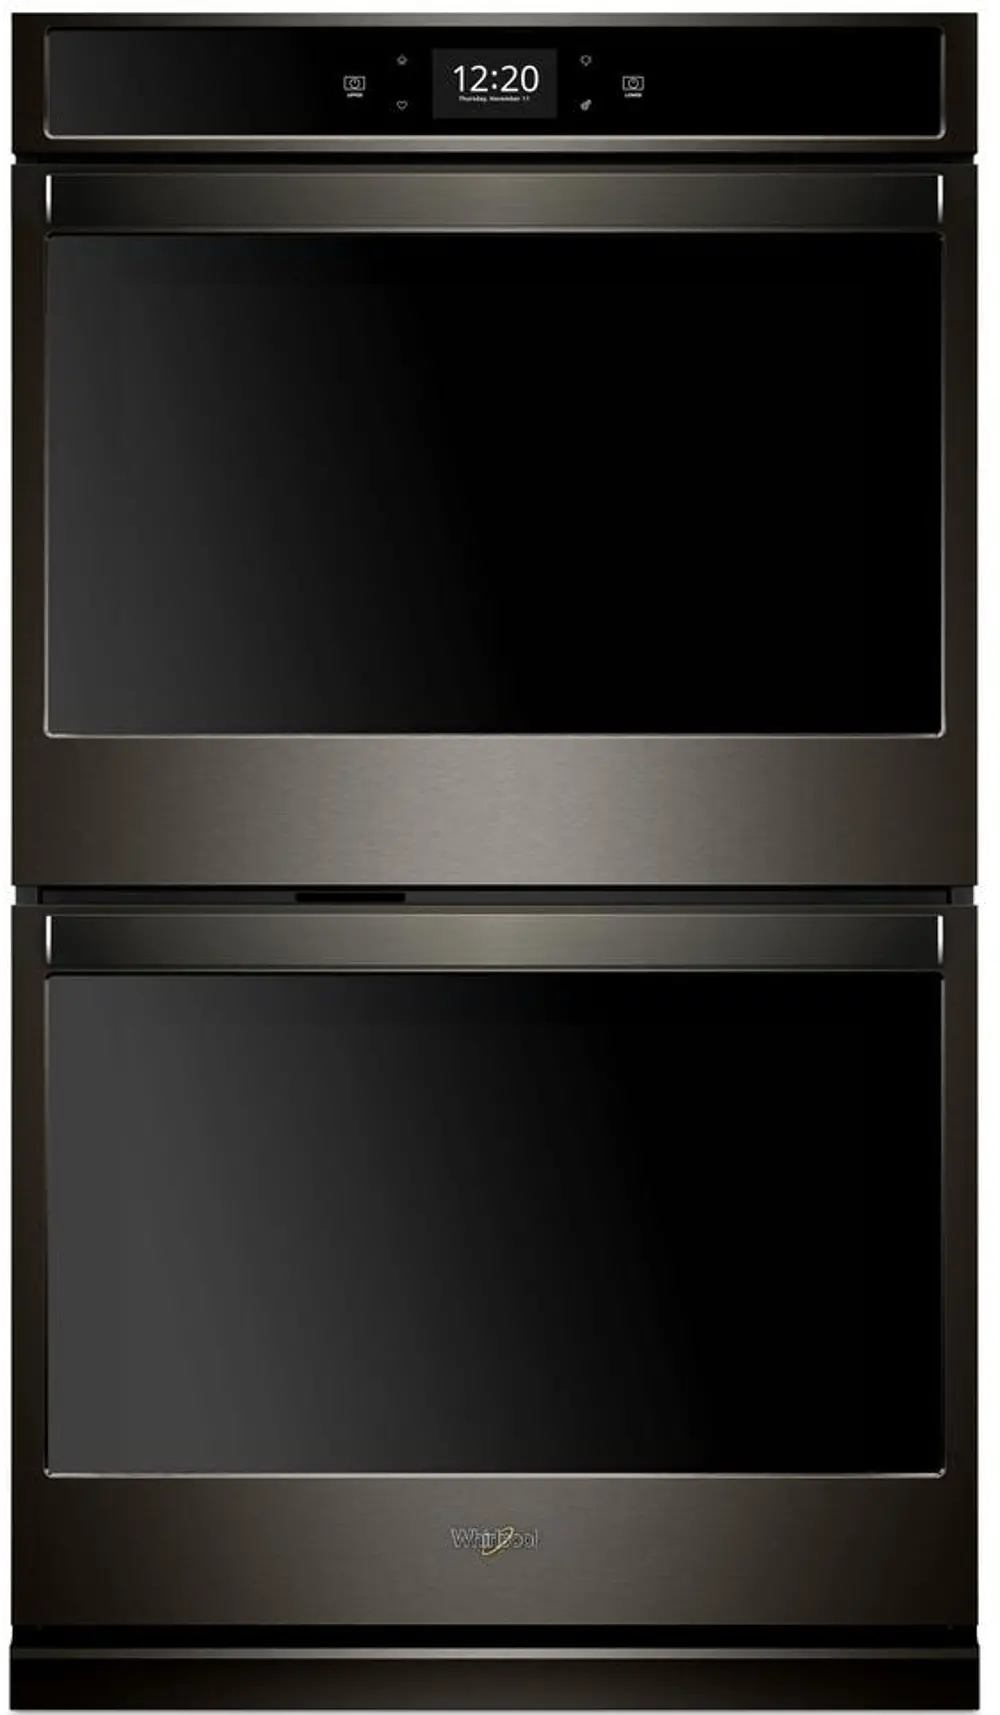 WOD77EC0HV Whirlpool 30 Inch Smart Double Wall Oven - 10.0 cu. ft. Black Stainless Steel-1